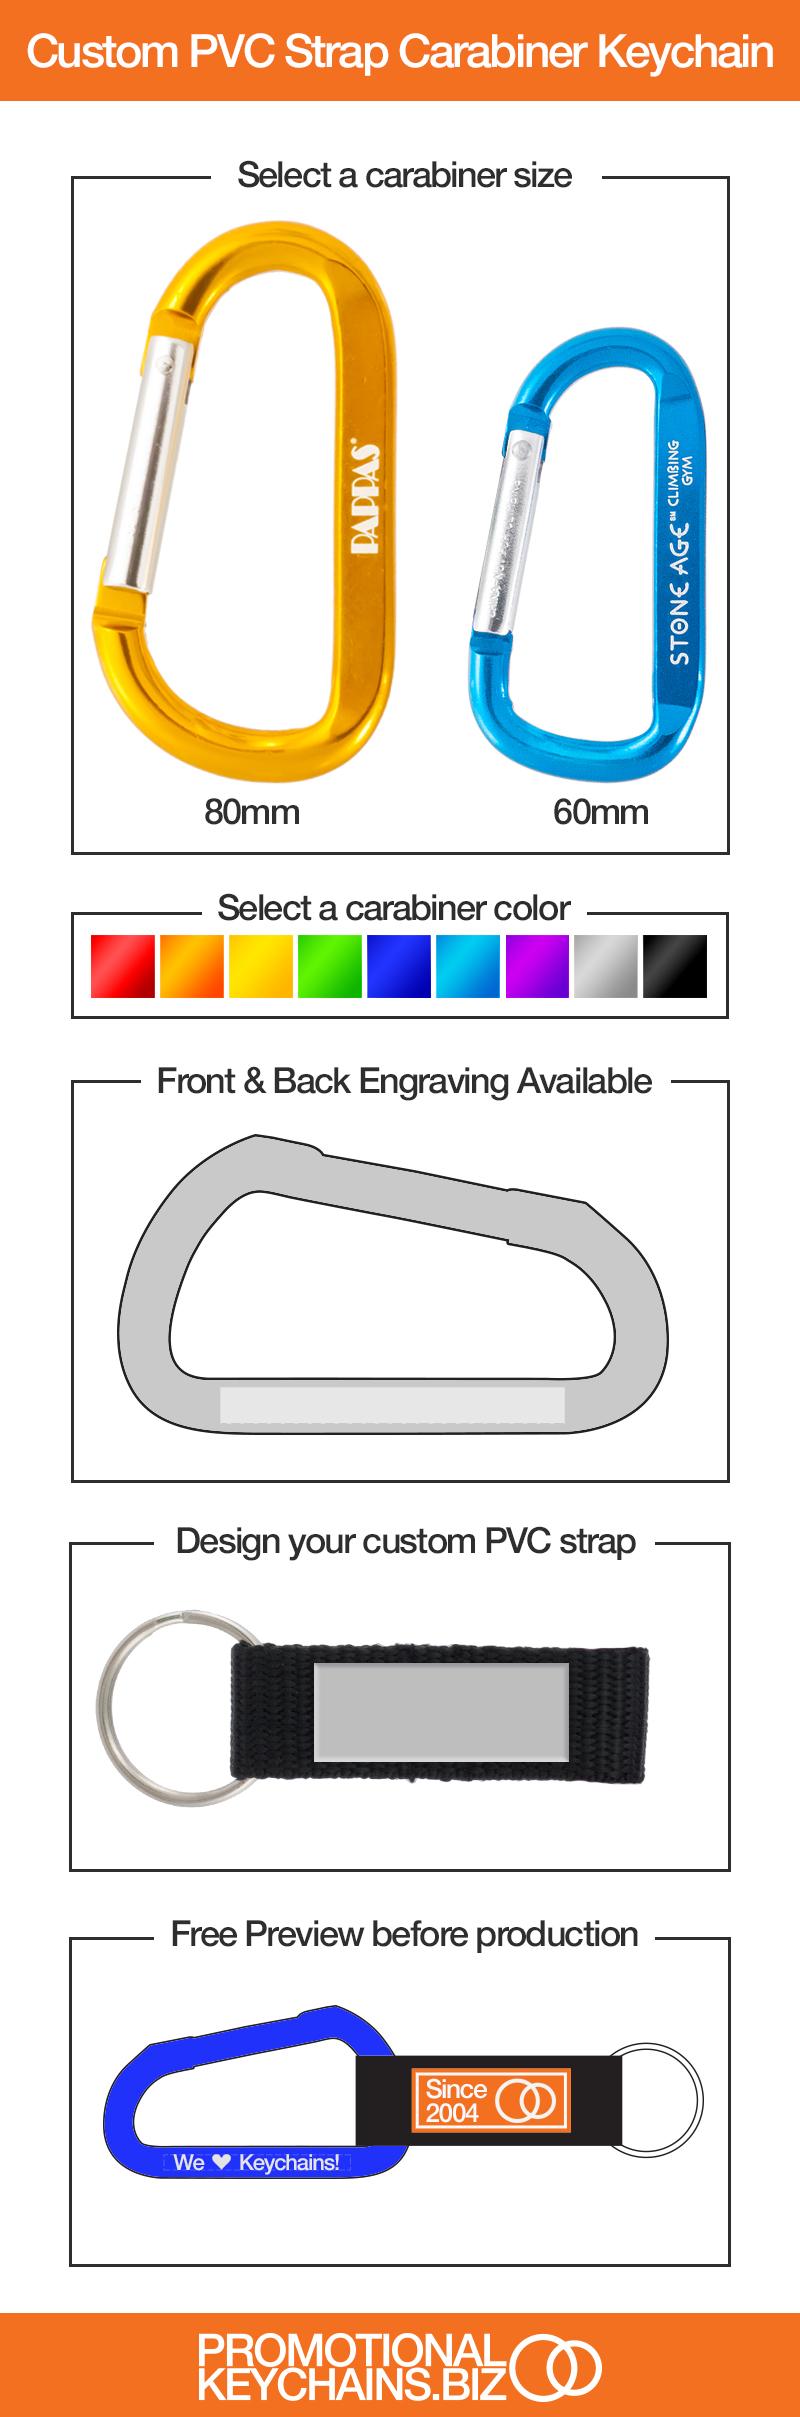 How to order an engraved carabiner keychain with custom PVC strap from PromotionalKeychains.biz